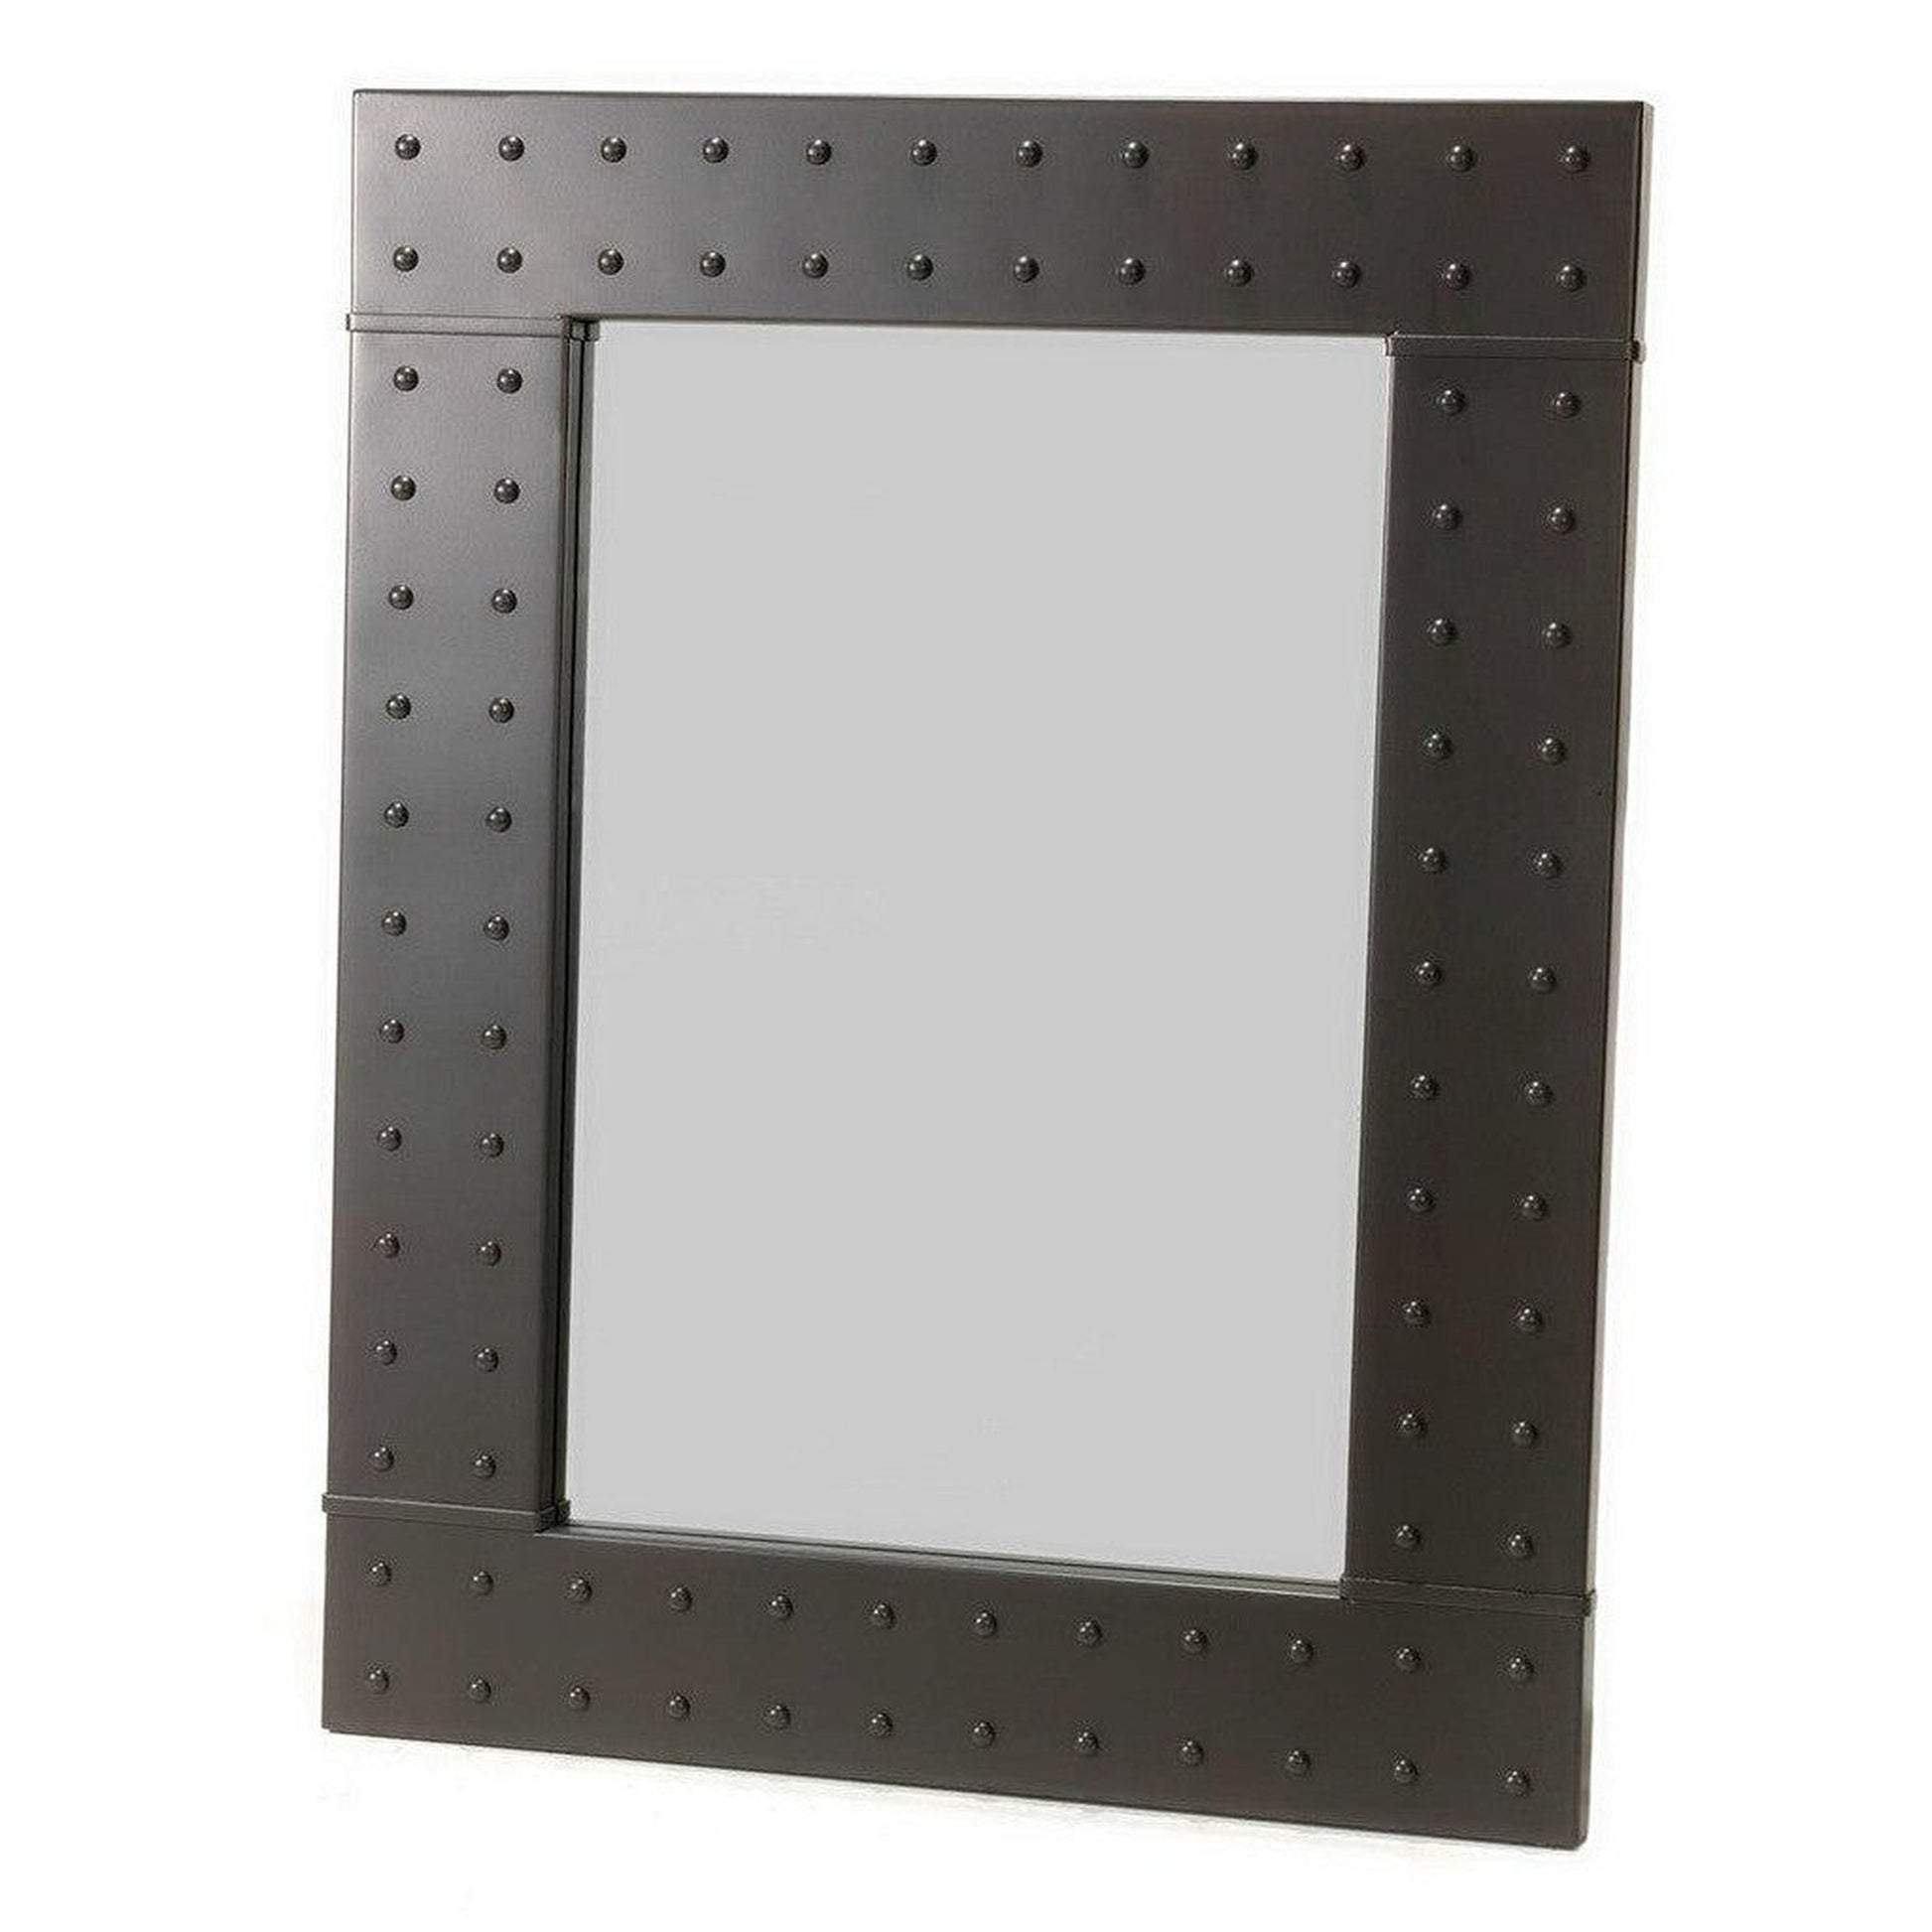 Stone County Ironworks Merrimack Rivet 36" x 45" Large Hand Rubbed Bronze Iron Wall Mirror With Pewter Iron Accent